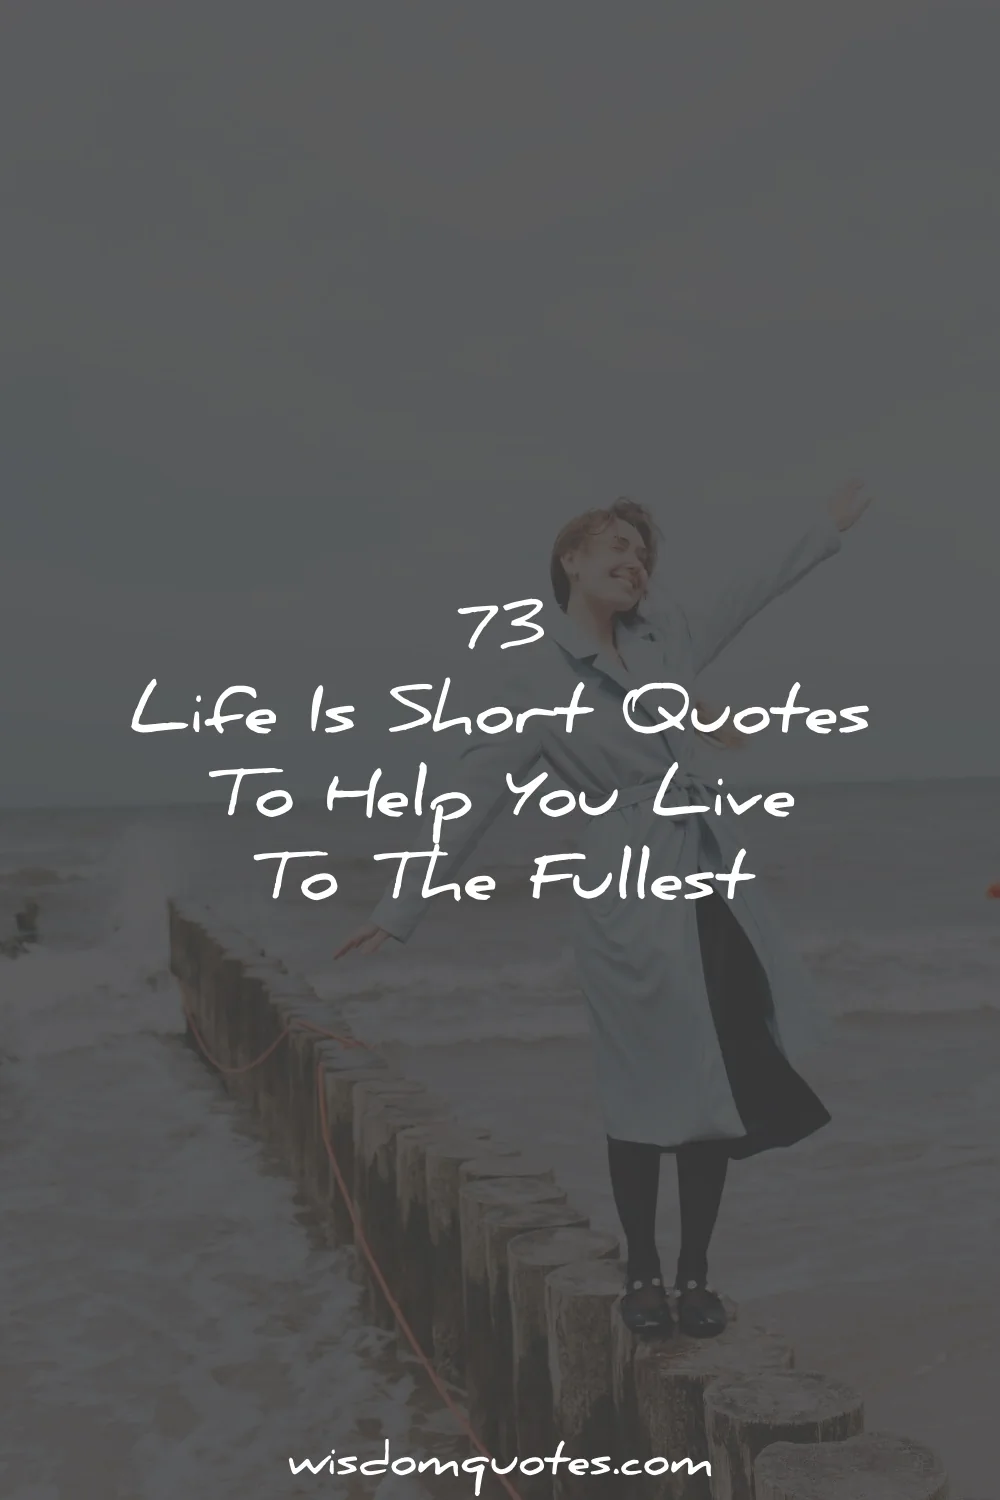 life is short quotes help live fullest wisdom